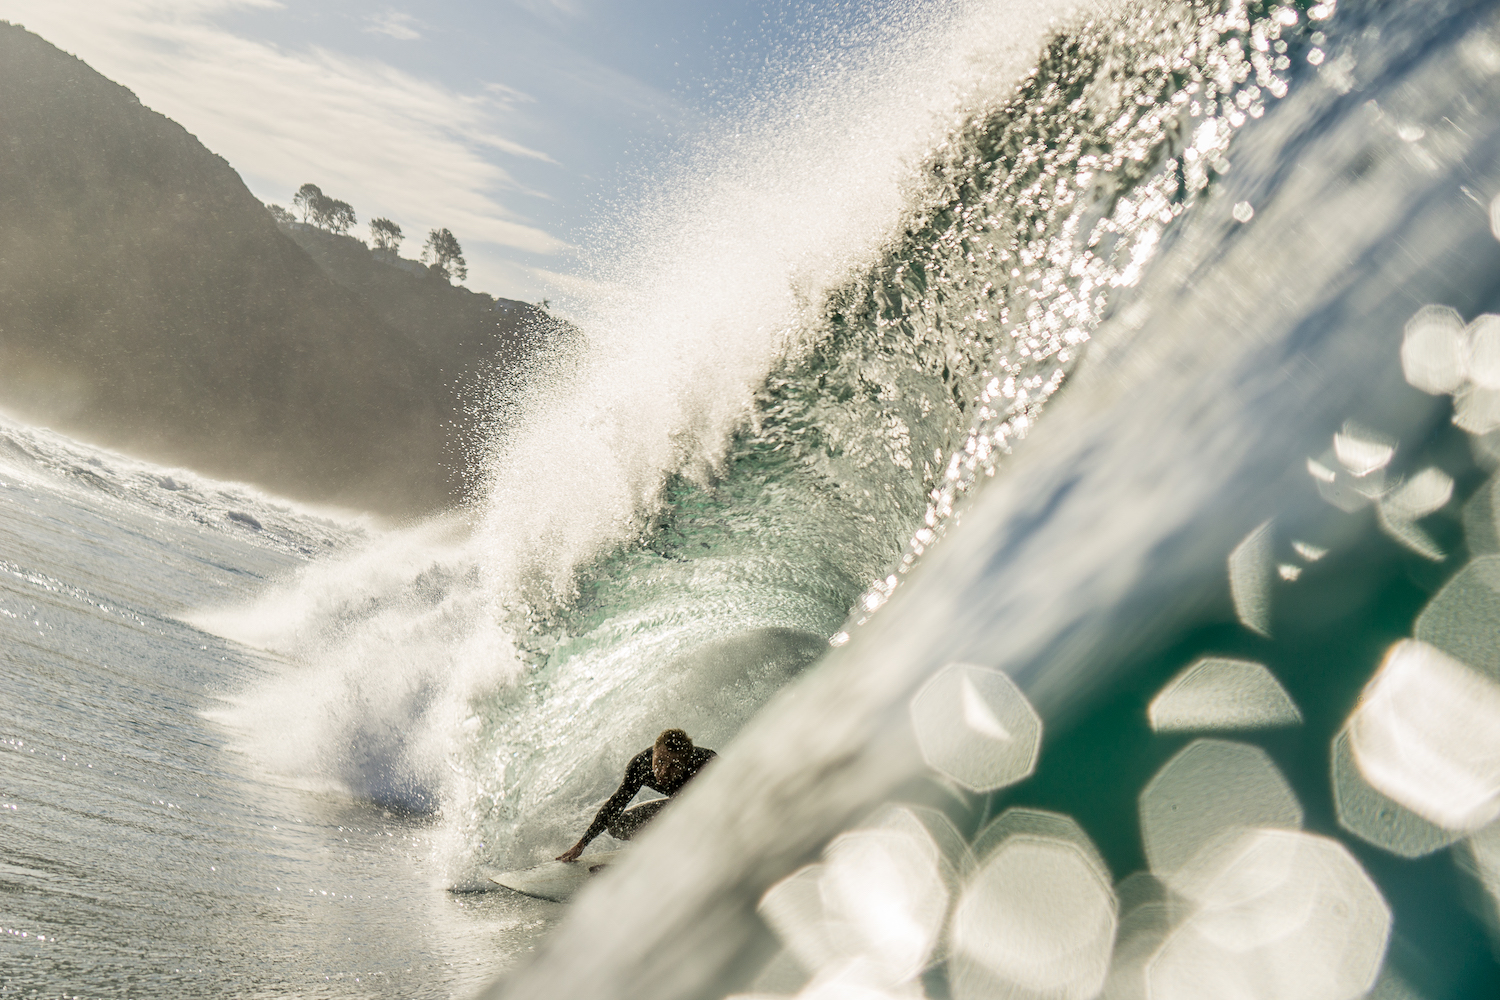 The best surf spots in San Diego featuring Black's Beach, La Jolla with a surfer in a barrel 